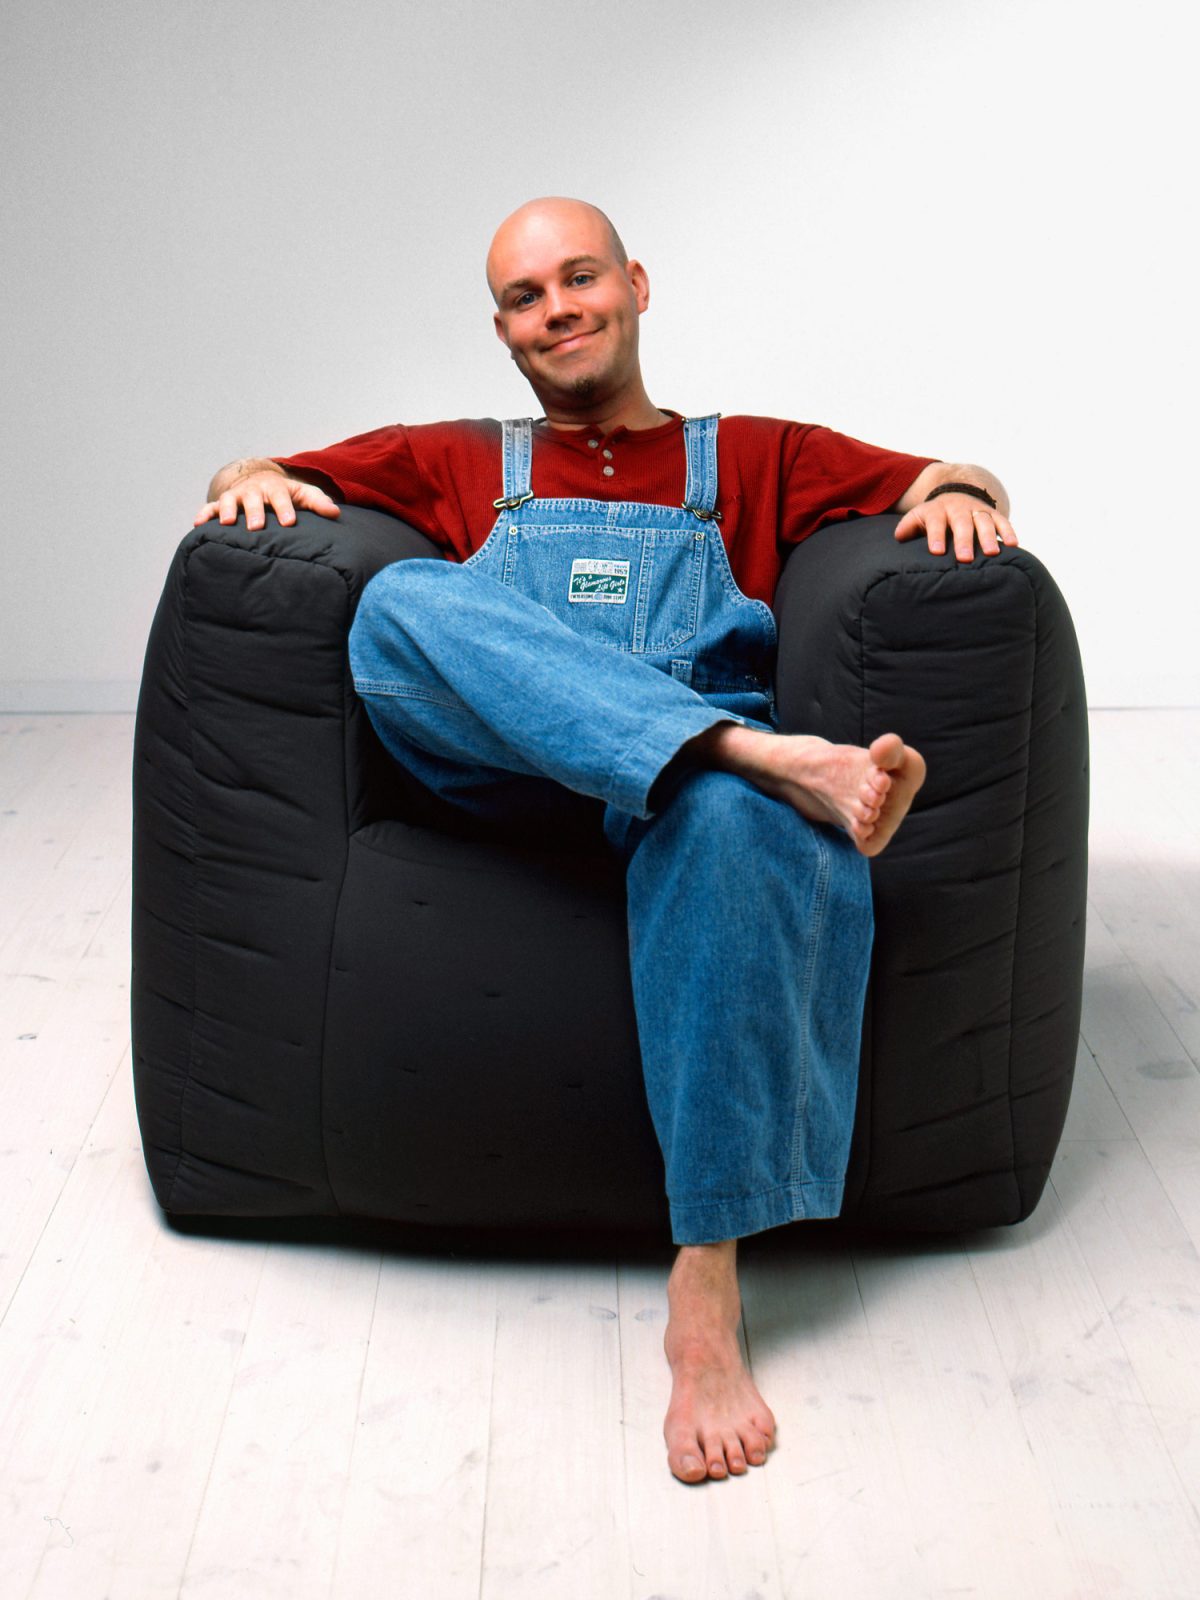 Smiling young man in dungarees sits in chubby dark blue armchair from the a.i.r series.